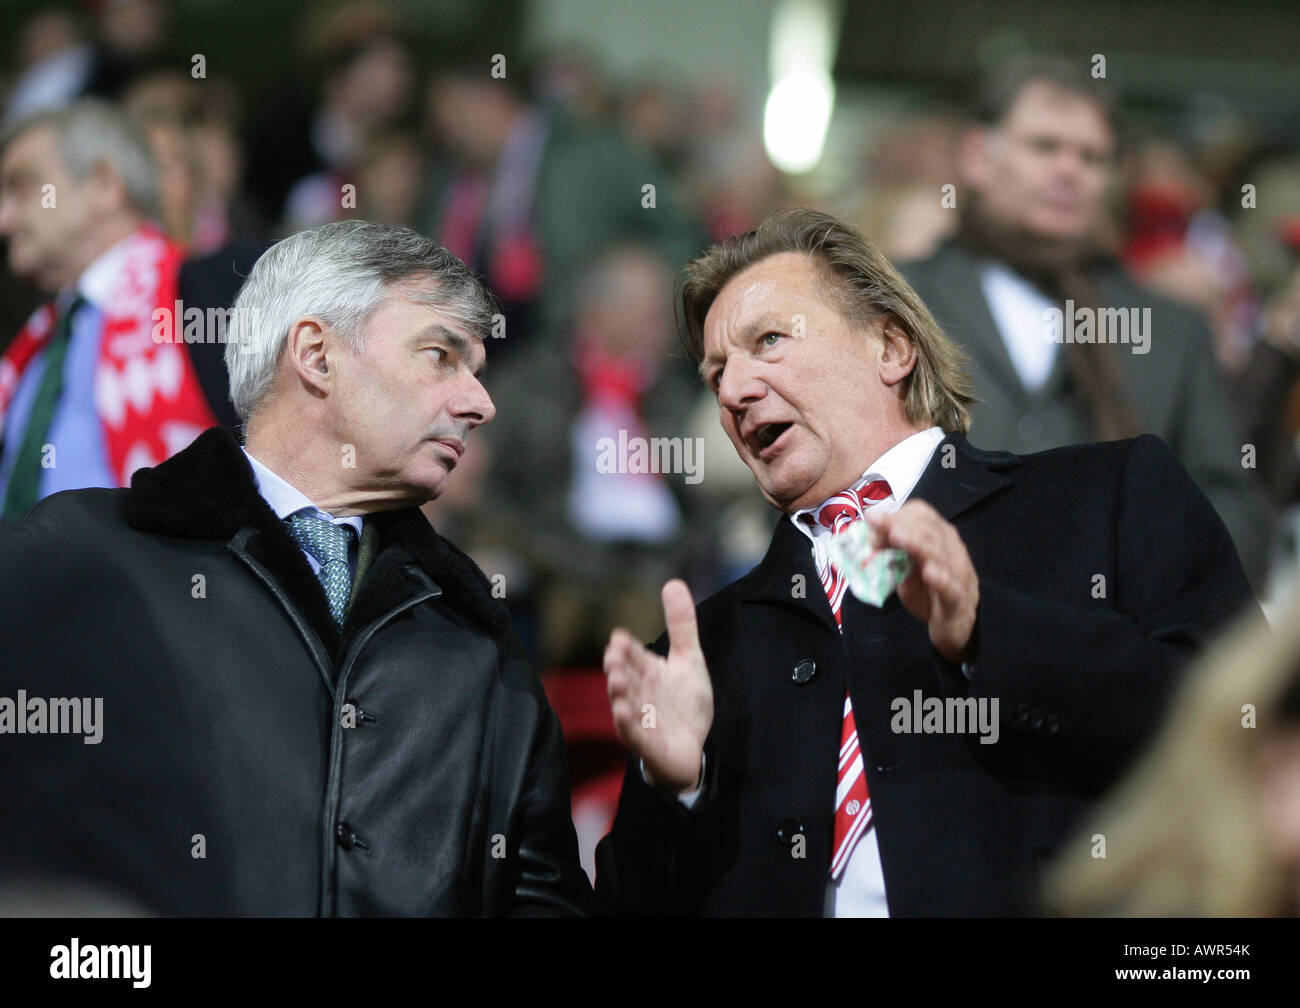 Michael Meier (left), manager of the german footballclub 1. FC Koeln, with Harald Strutz, manager of Mainz 05 (right) Stock Photo